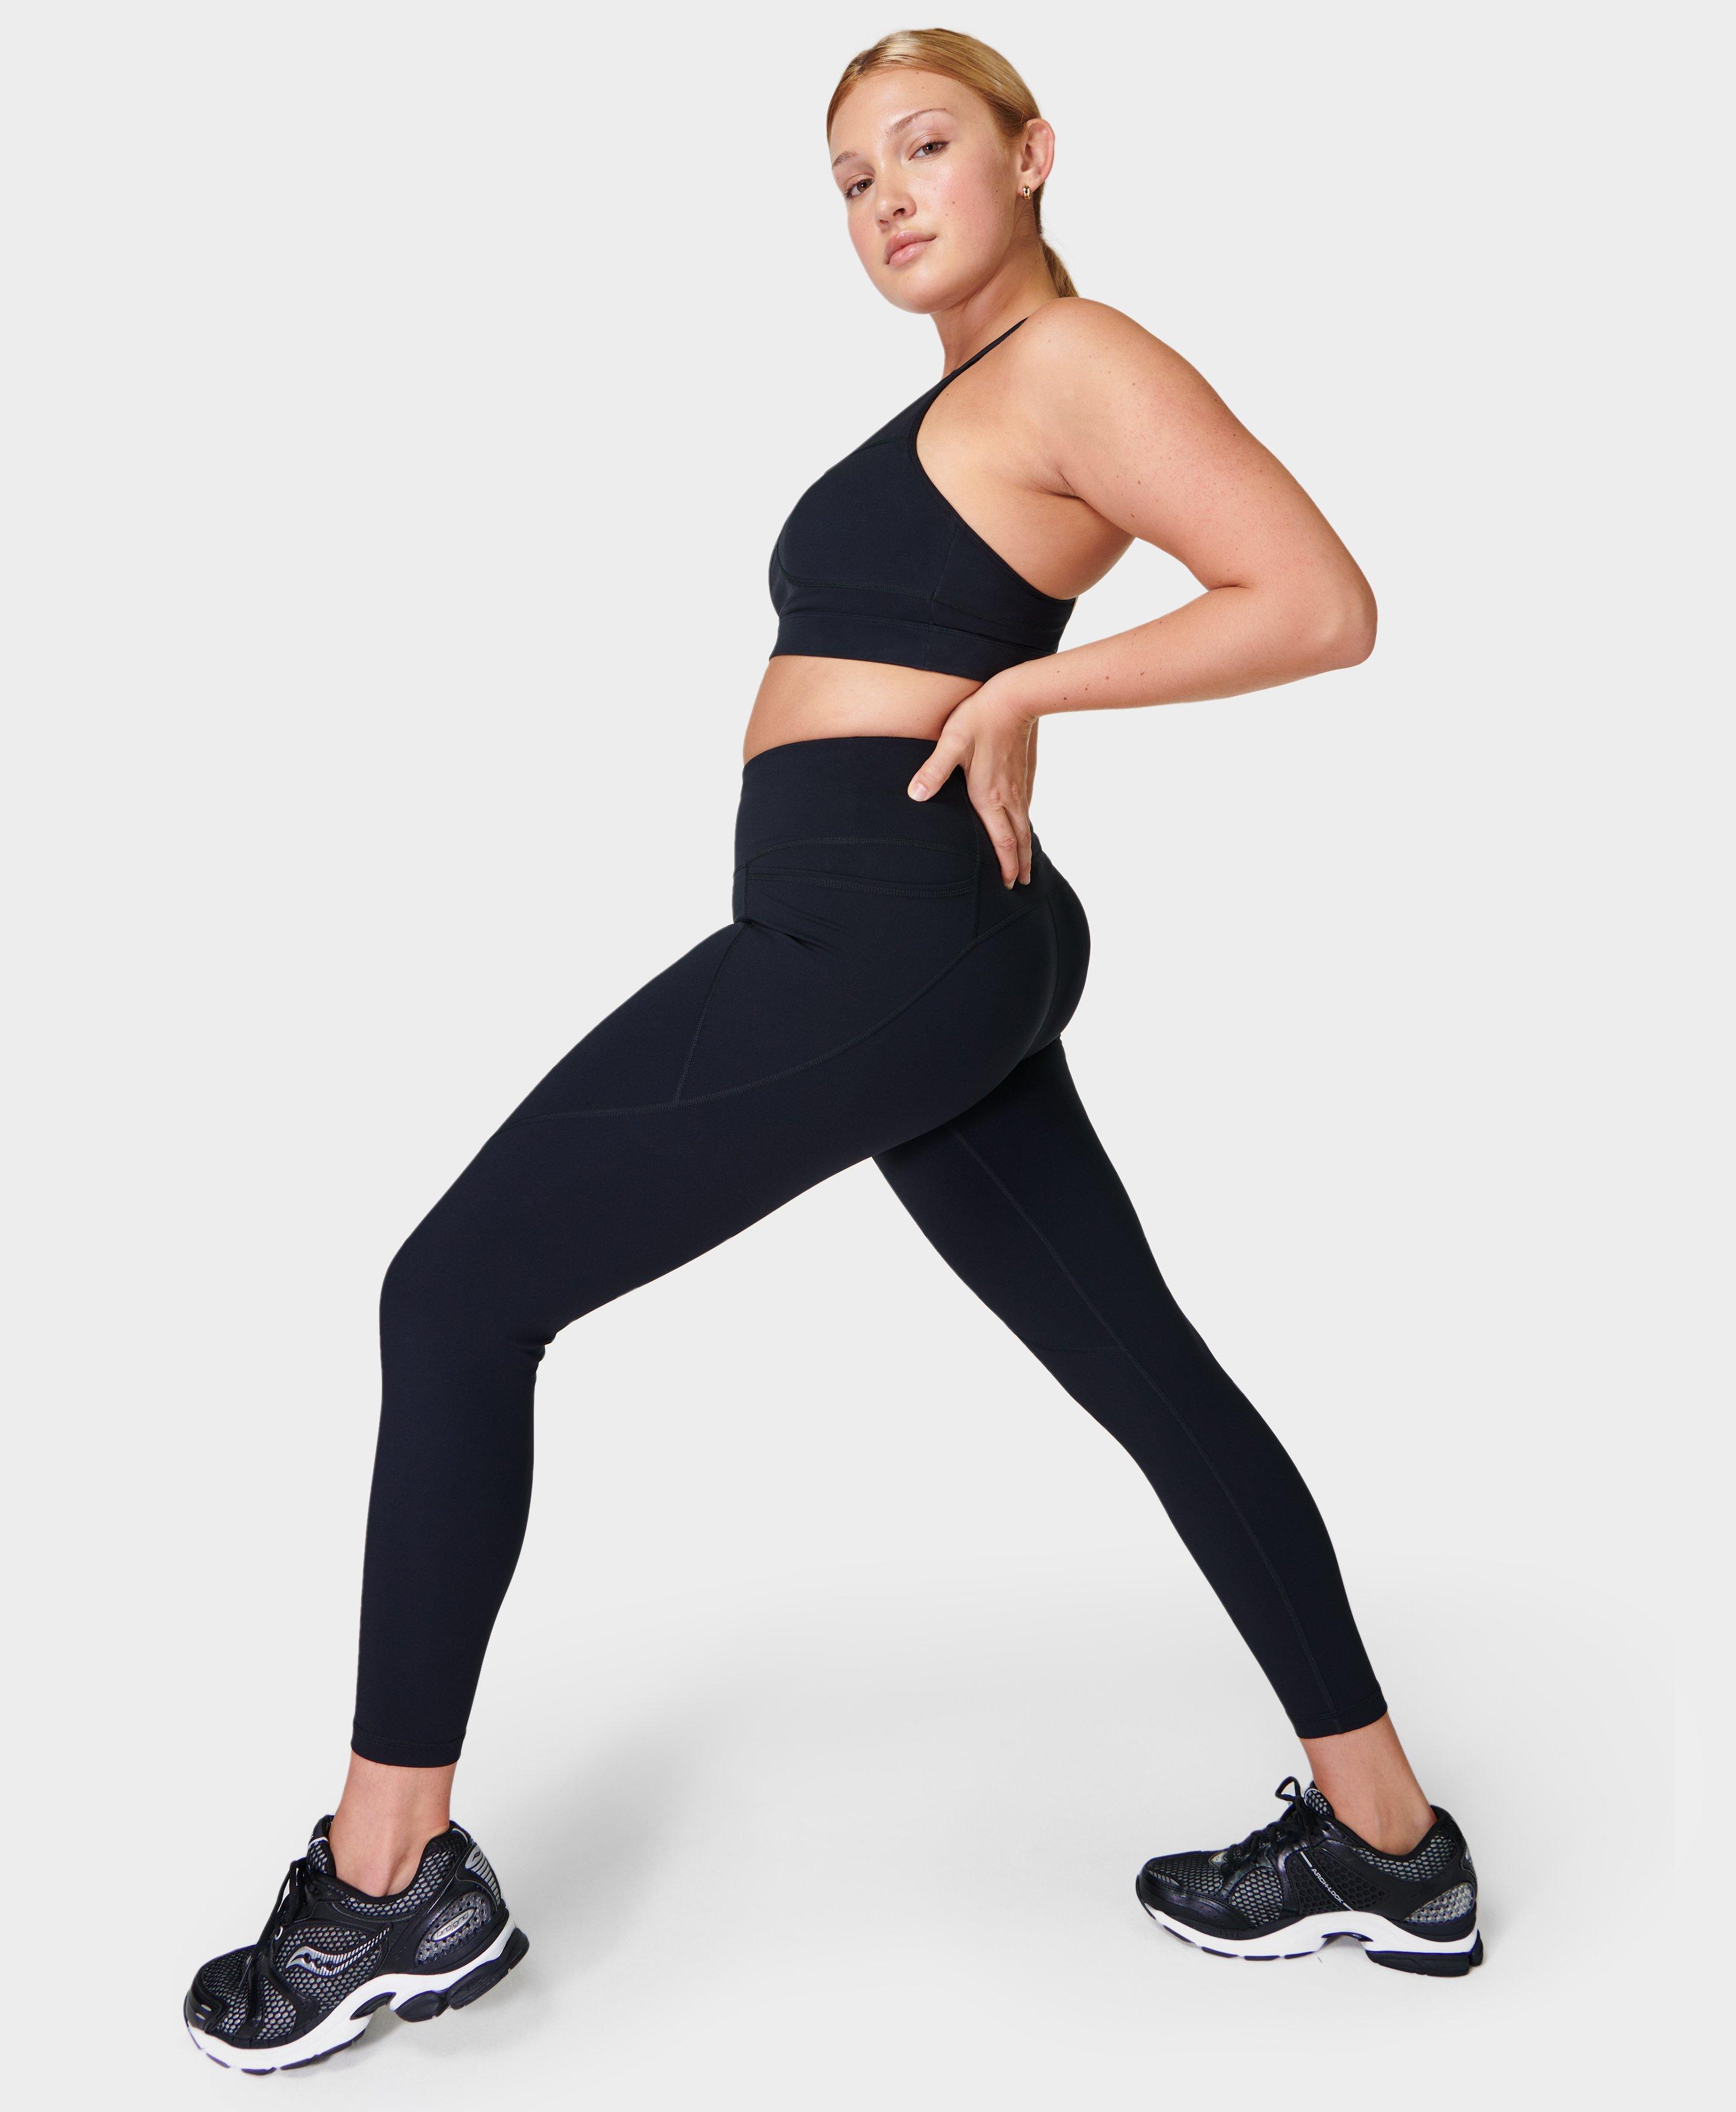 Buy SHAPERX Yoga Pants-Workout Leggings for Women with Pockets High Waisted  Tummy Control Postpartum Athletic Gym Leggings Running (26 Till 34) Free  Size Pack of 1 Black at Amazon.in